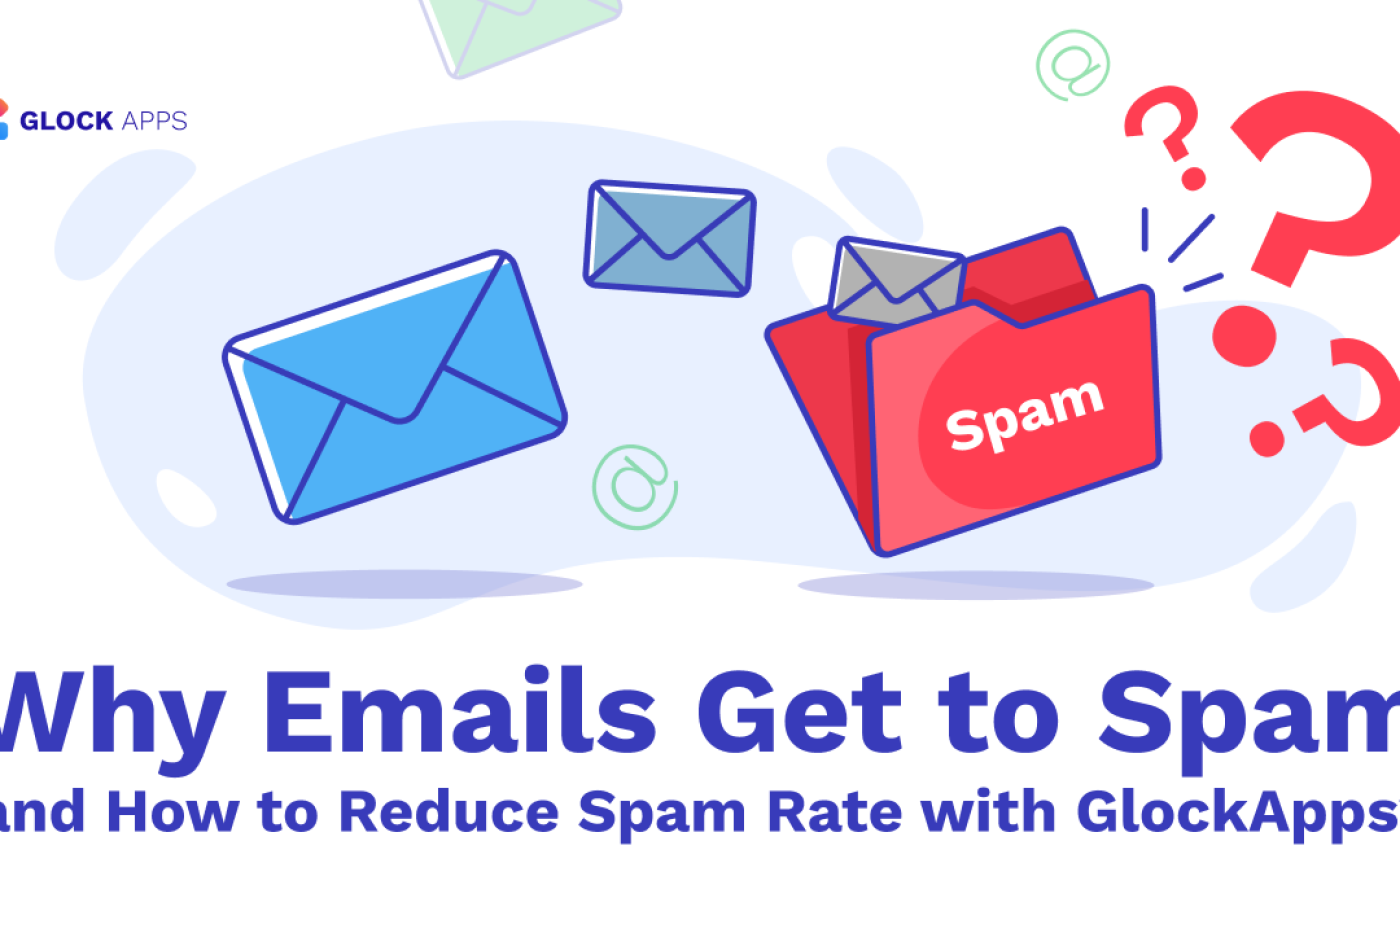 How Do Emails End Up in the Spam Folder: Exploring Factors Behind Spam Filtering